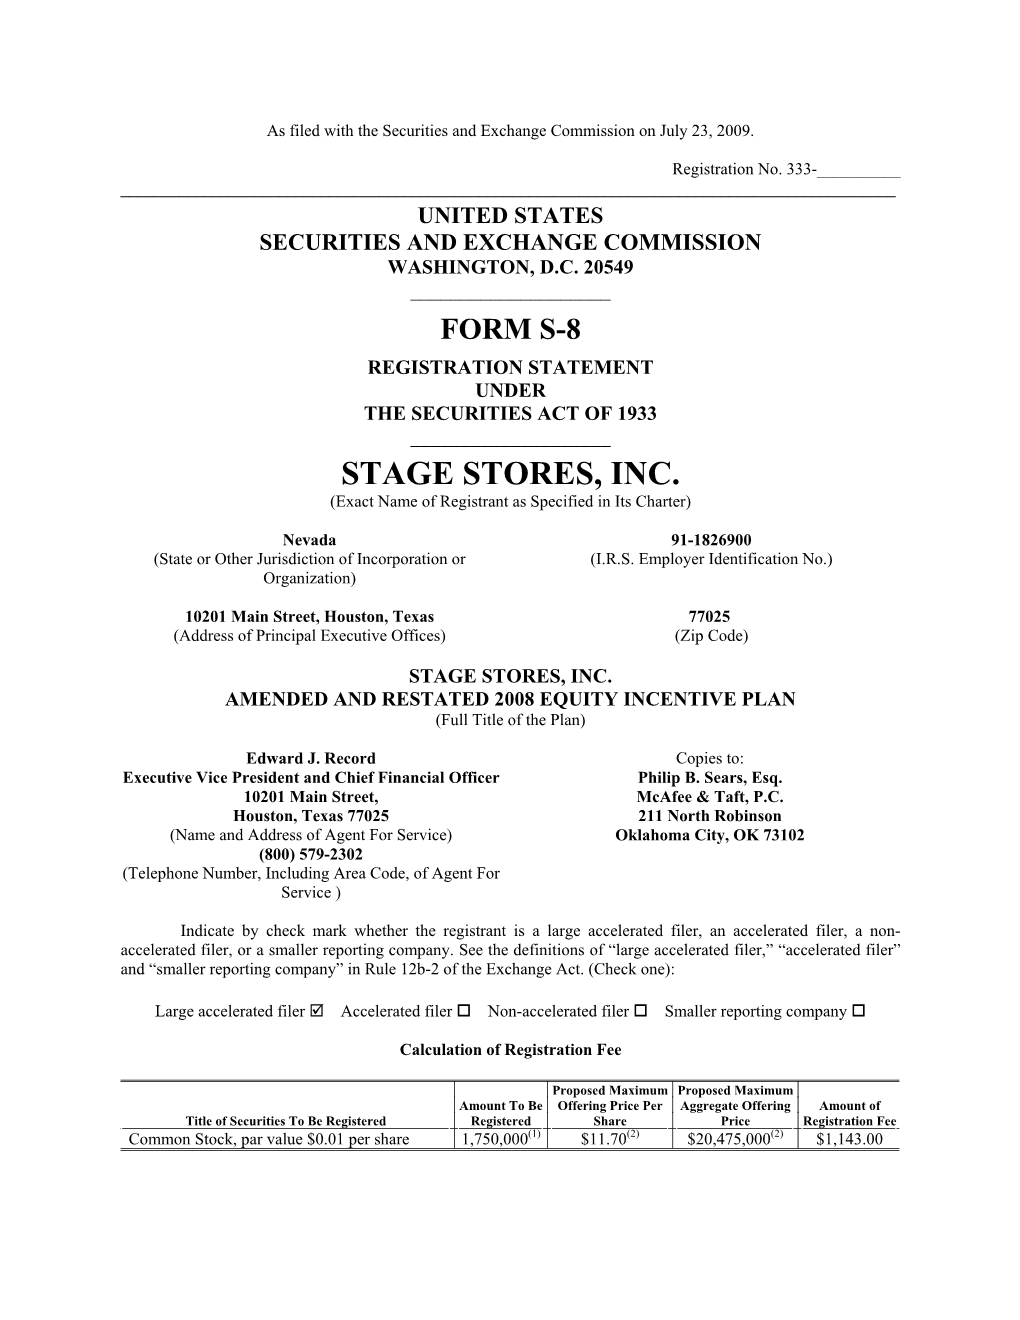 STAGE STORES, INC. (Exact Name of Registrant As Specified in Its Charter)